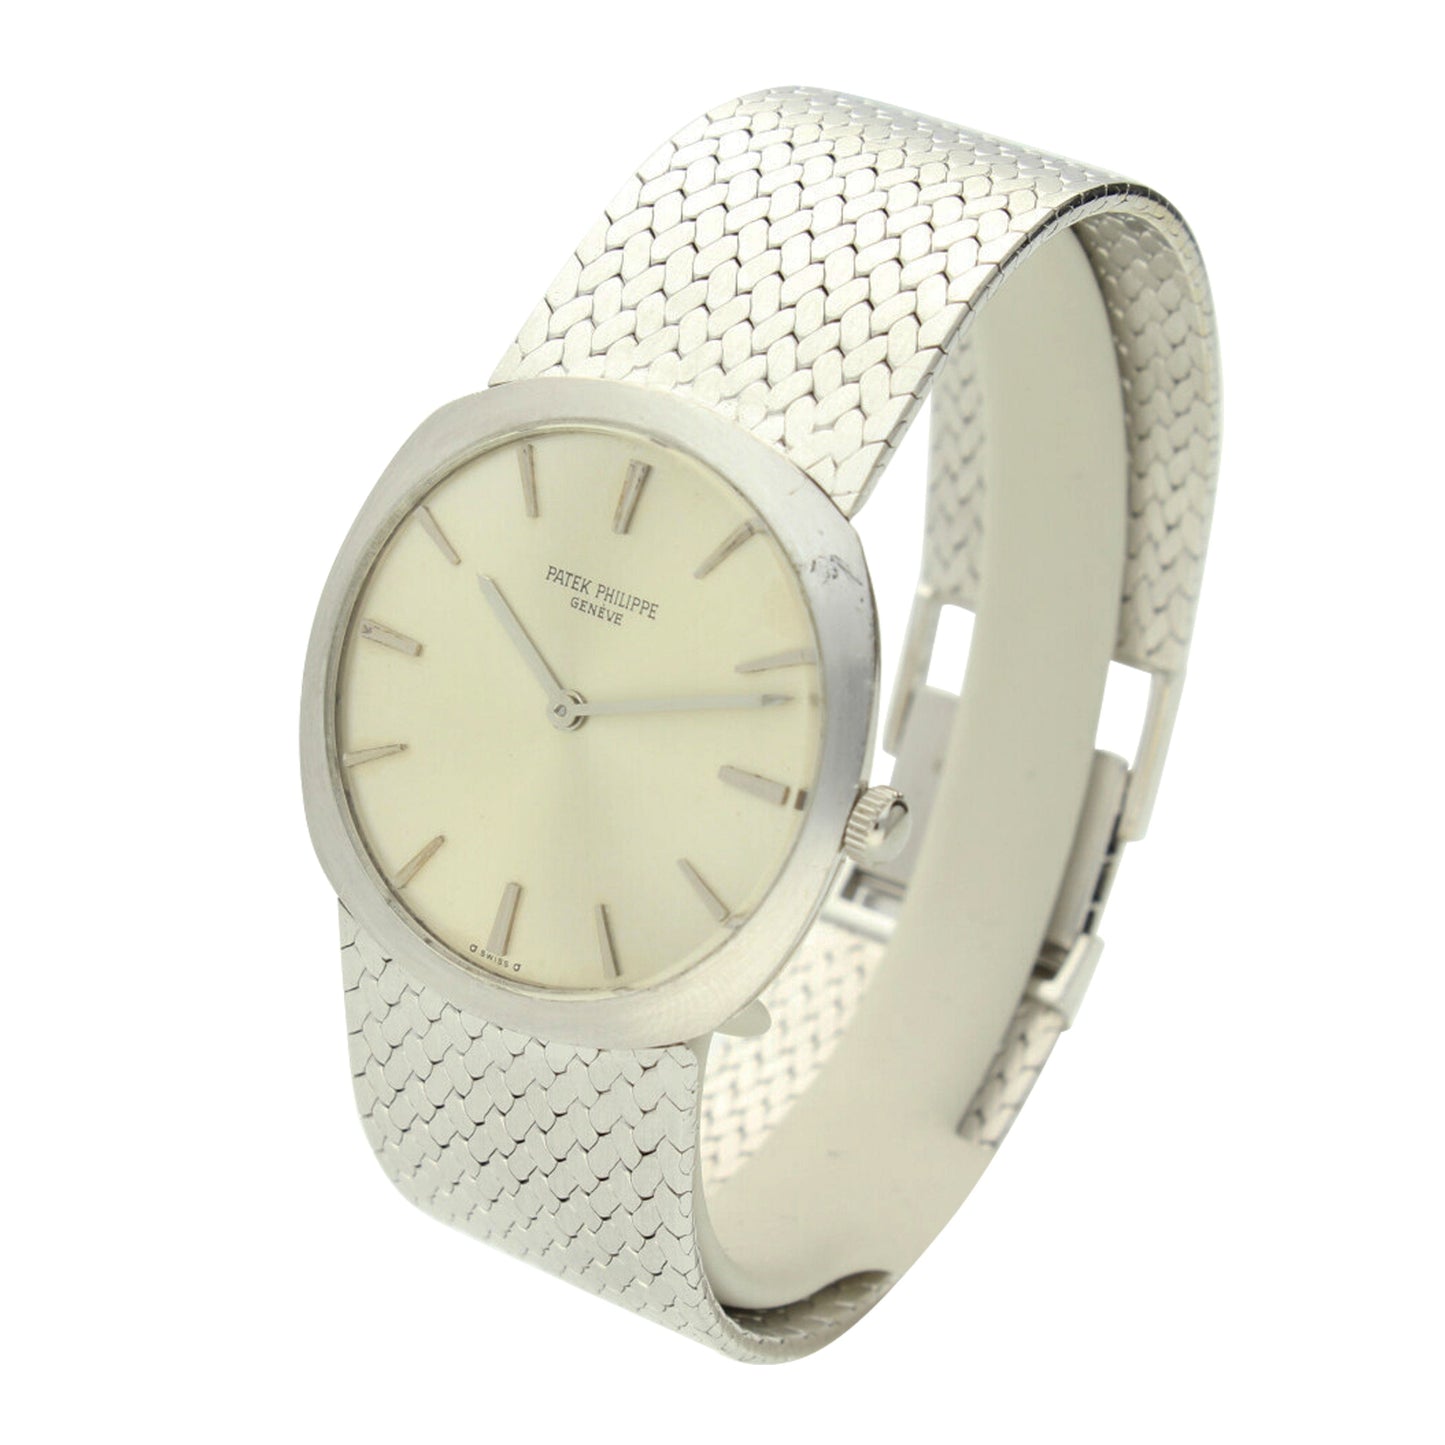 18ct white gold Patek Philippe, reference 3544 "Montro Ellipse" bracelet watch. Made 1970